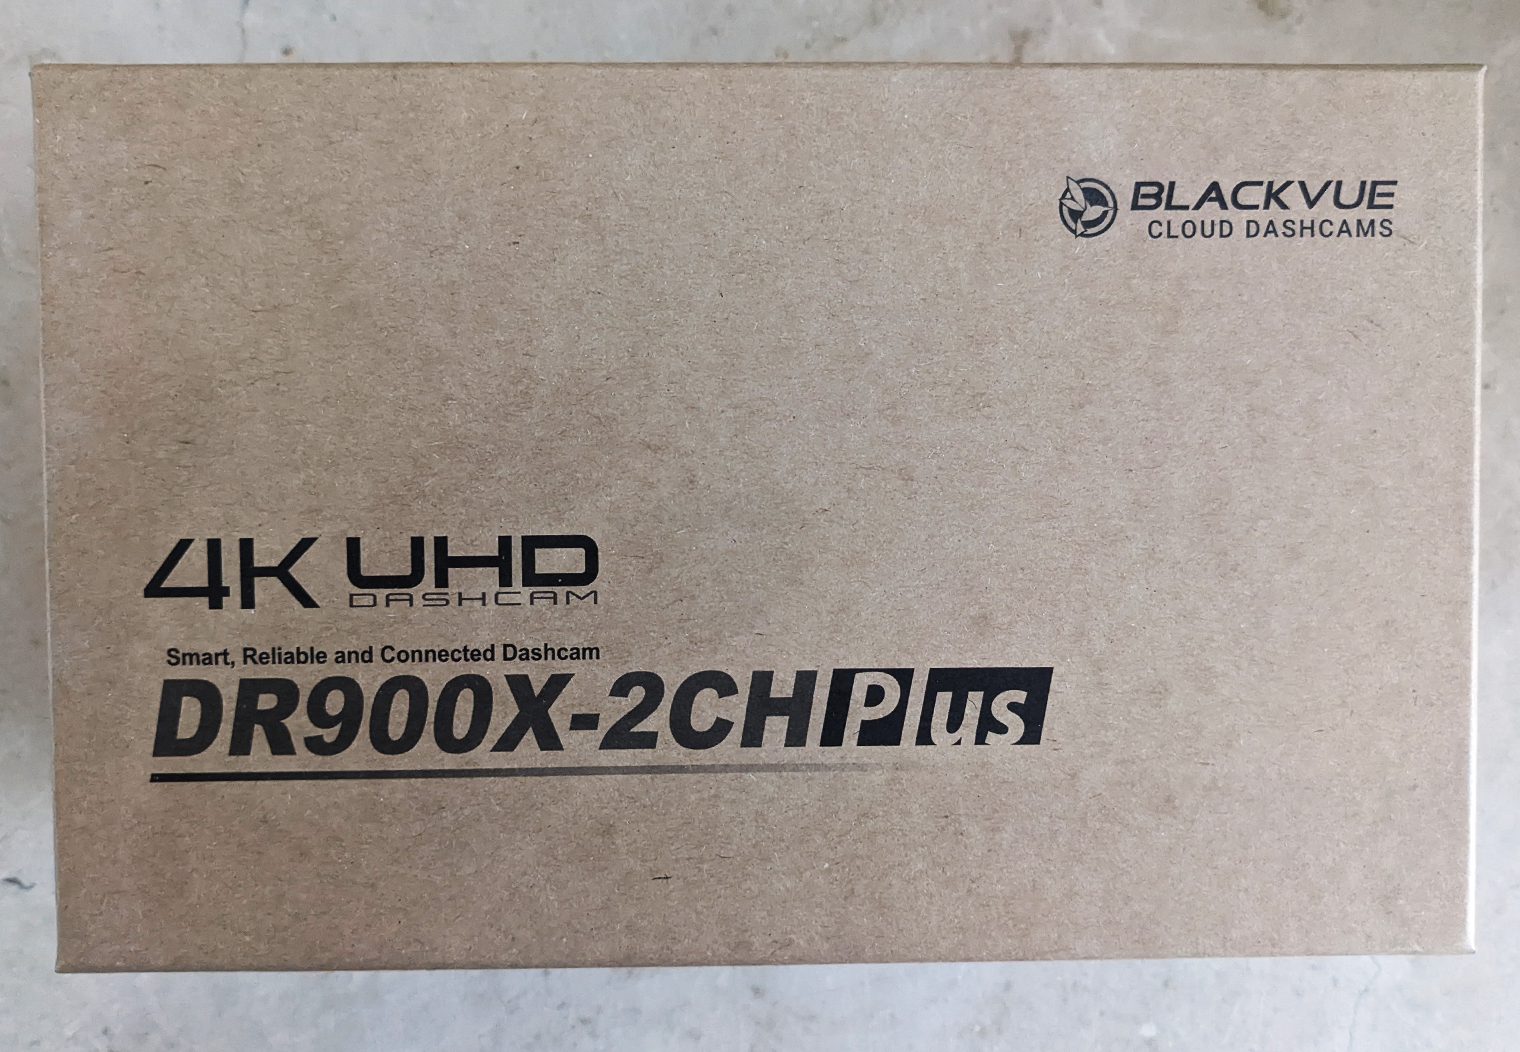 BlackVue DR900X-2CH in packaging before opening up for review